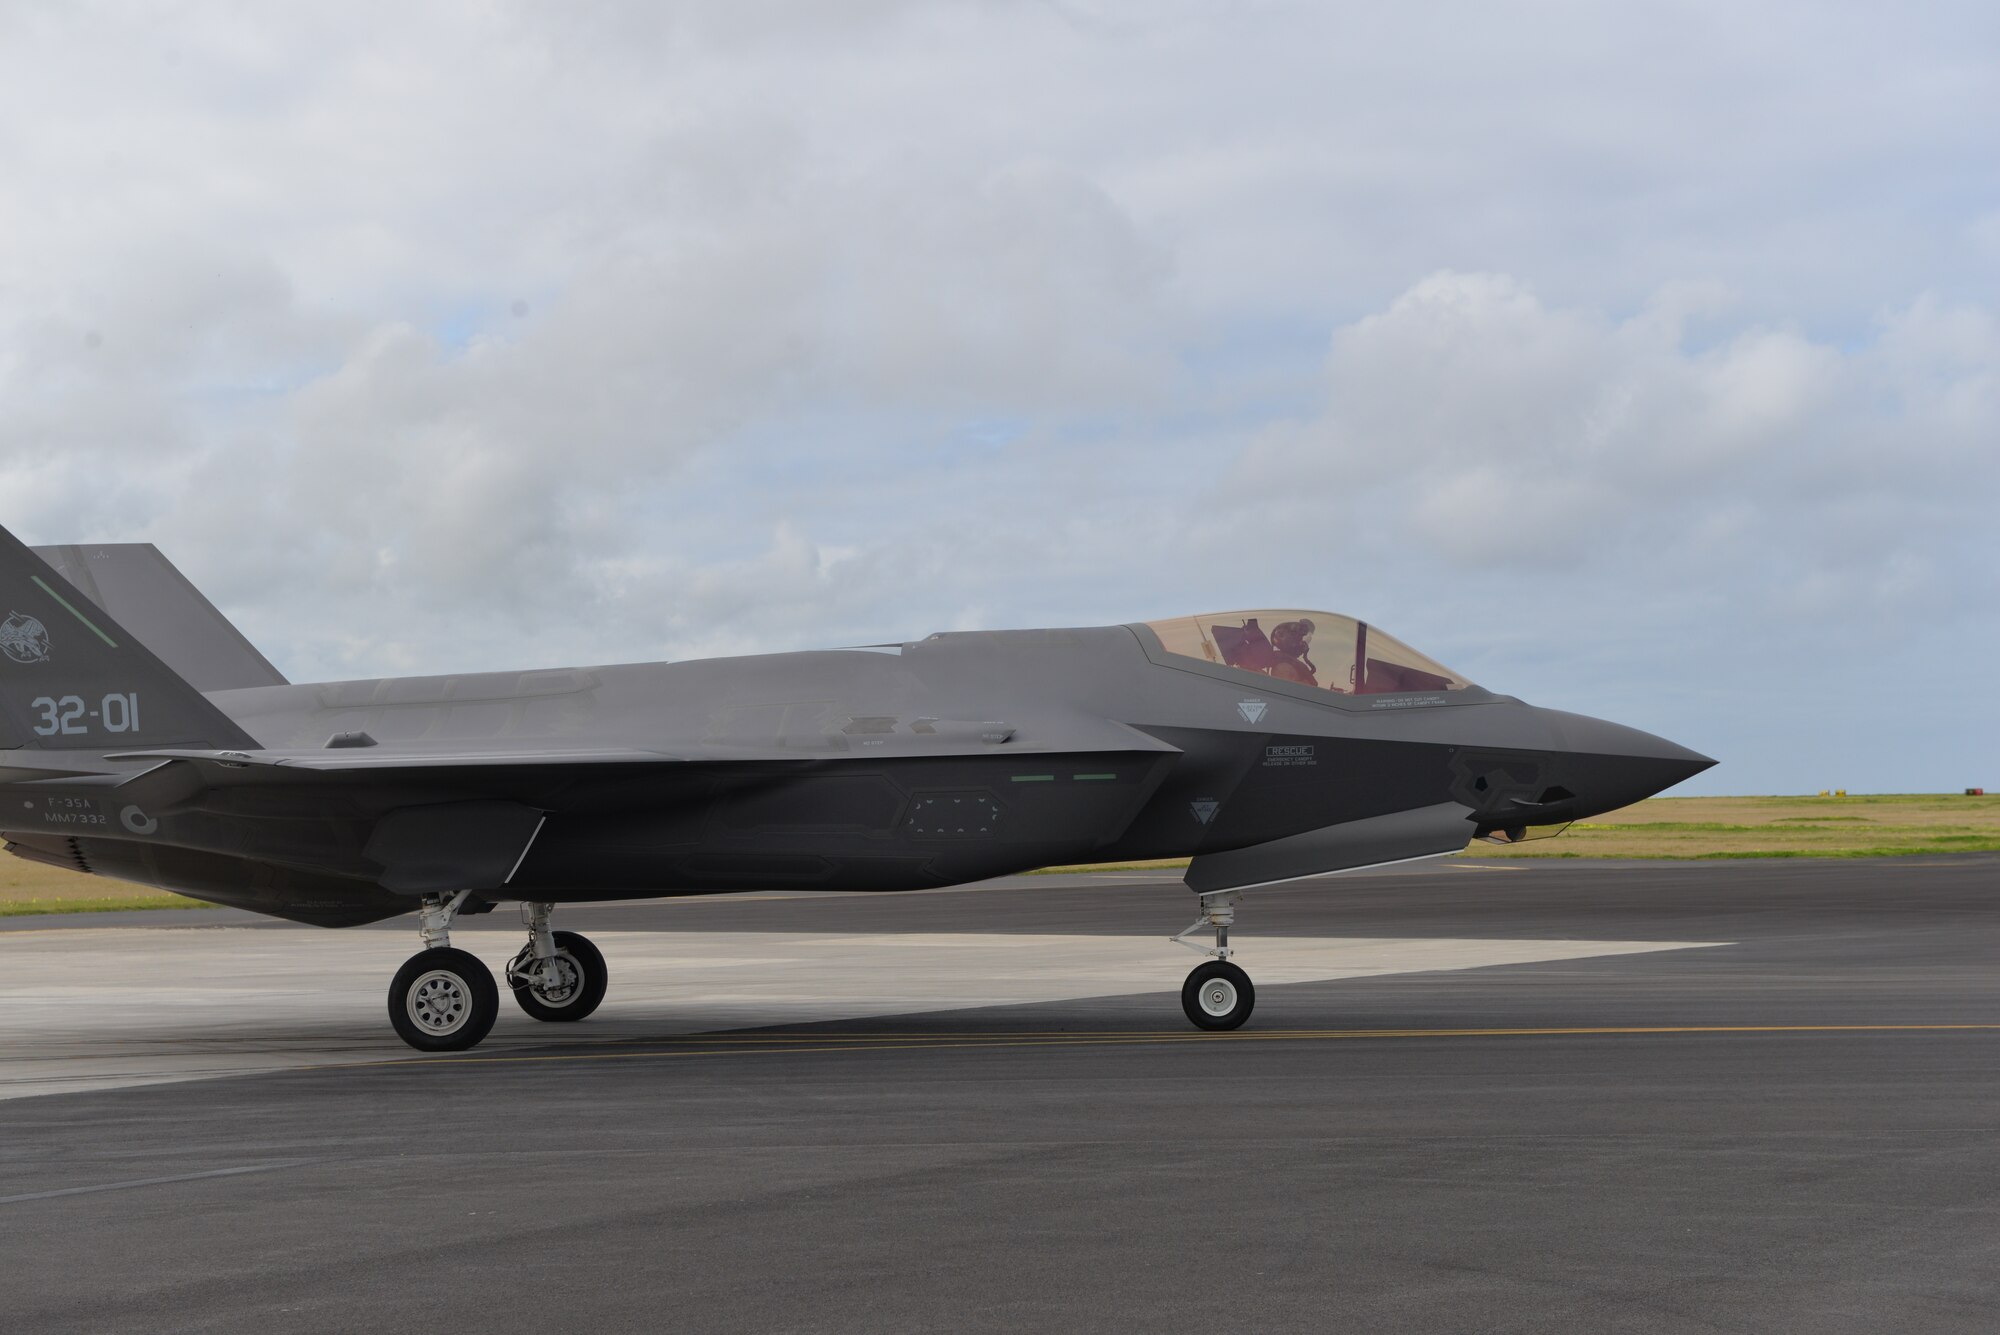 Air Force F-35A Lightning II lands at Lajes Field, Azores Portugal February 3, 2016. The Italian F-35A Lightning II refueled at Lajes Field on the first trans-Atlantic Ocean crossing from Cameri, Air Base Italy to Naval Air Station Patuxent River, Md., Feb 3-5. (U.S. Air Force photo by 1st Lt. Alexandra Trobe/Released) 